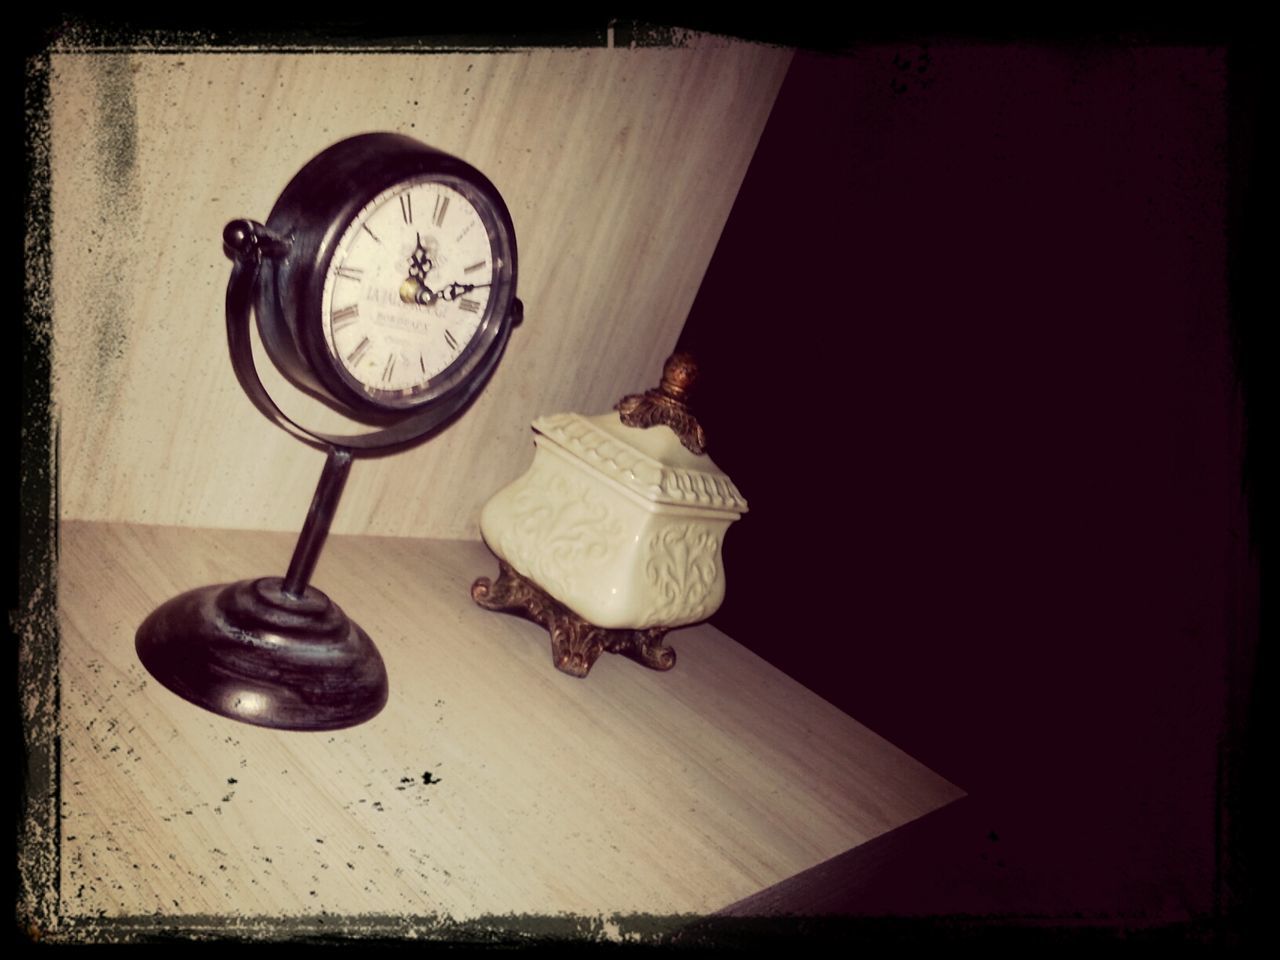 indoors, transfer print, still life, auto post production filter, table, old-fashioned, high angle view, technology, close-up, retro styled, no people, metal, accuracy, clock, wood - material, directly above, day, time, instrument of measurement, spoon